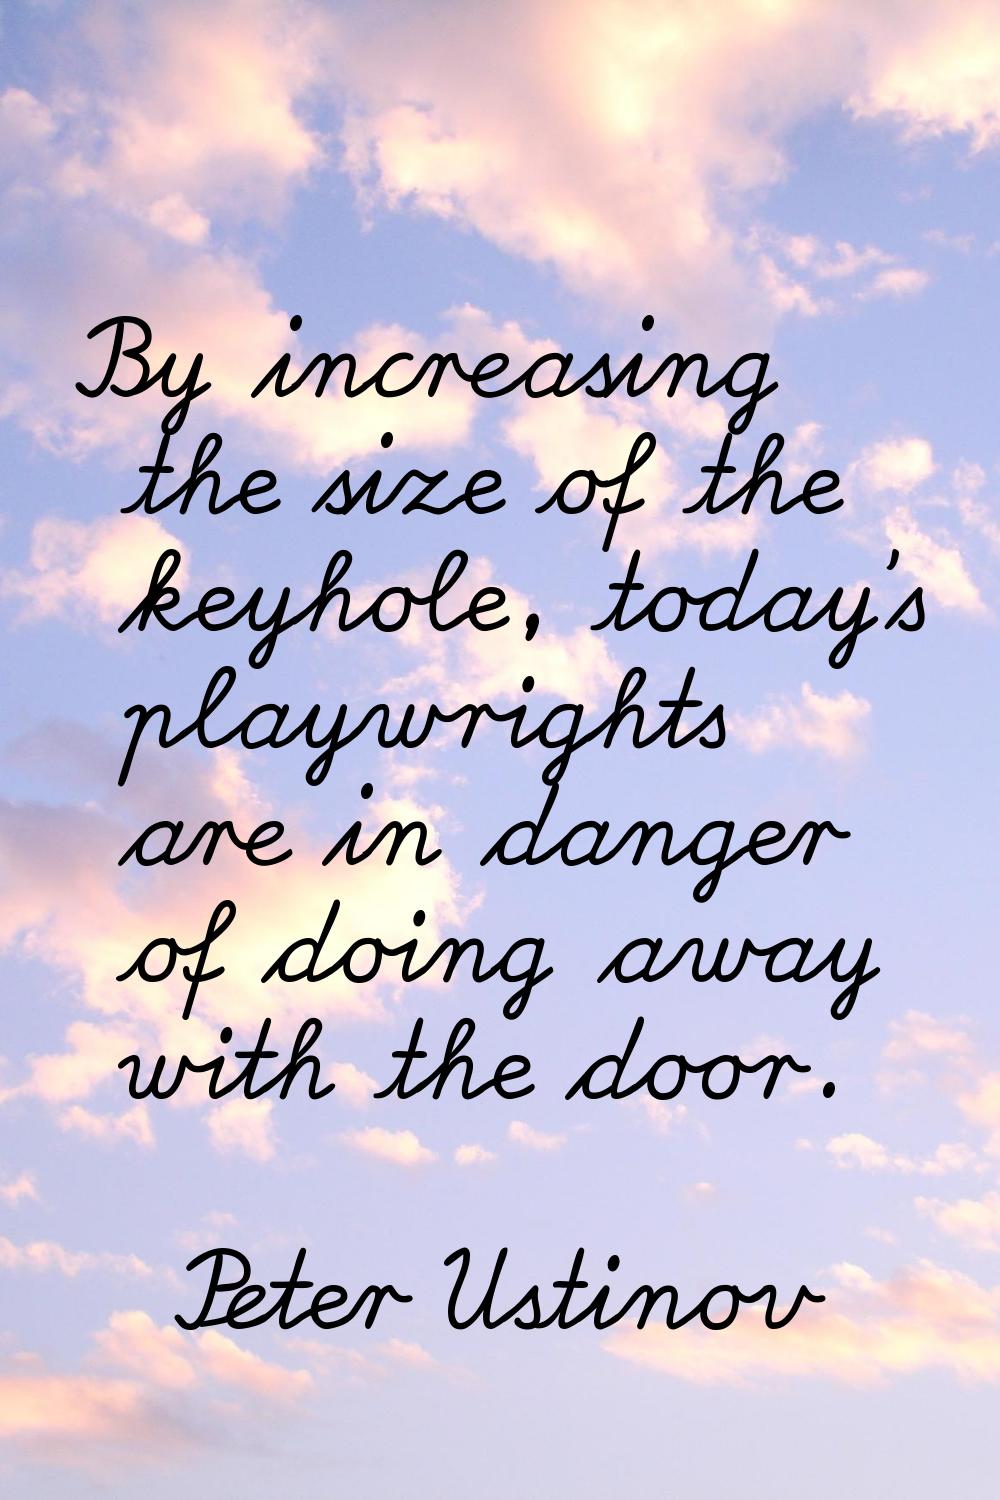 By increasing the size of the keyhole, today's playwrights are in danger of doing away with the doo